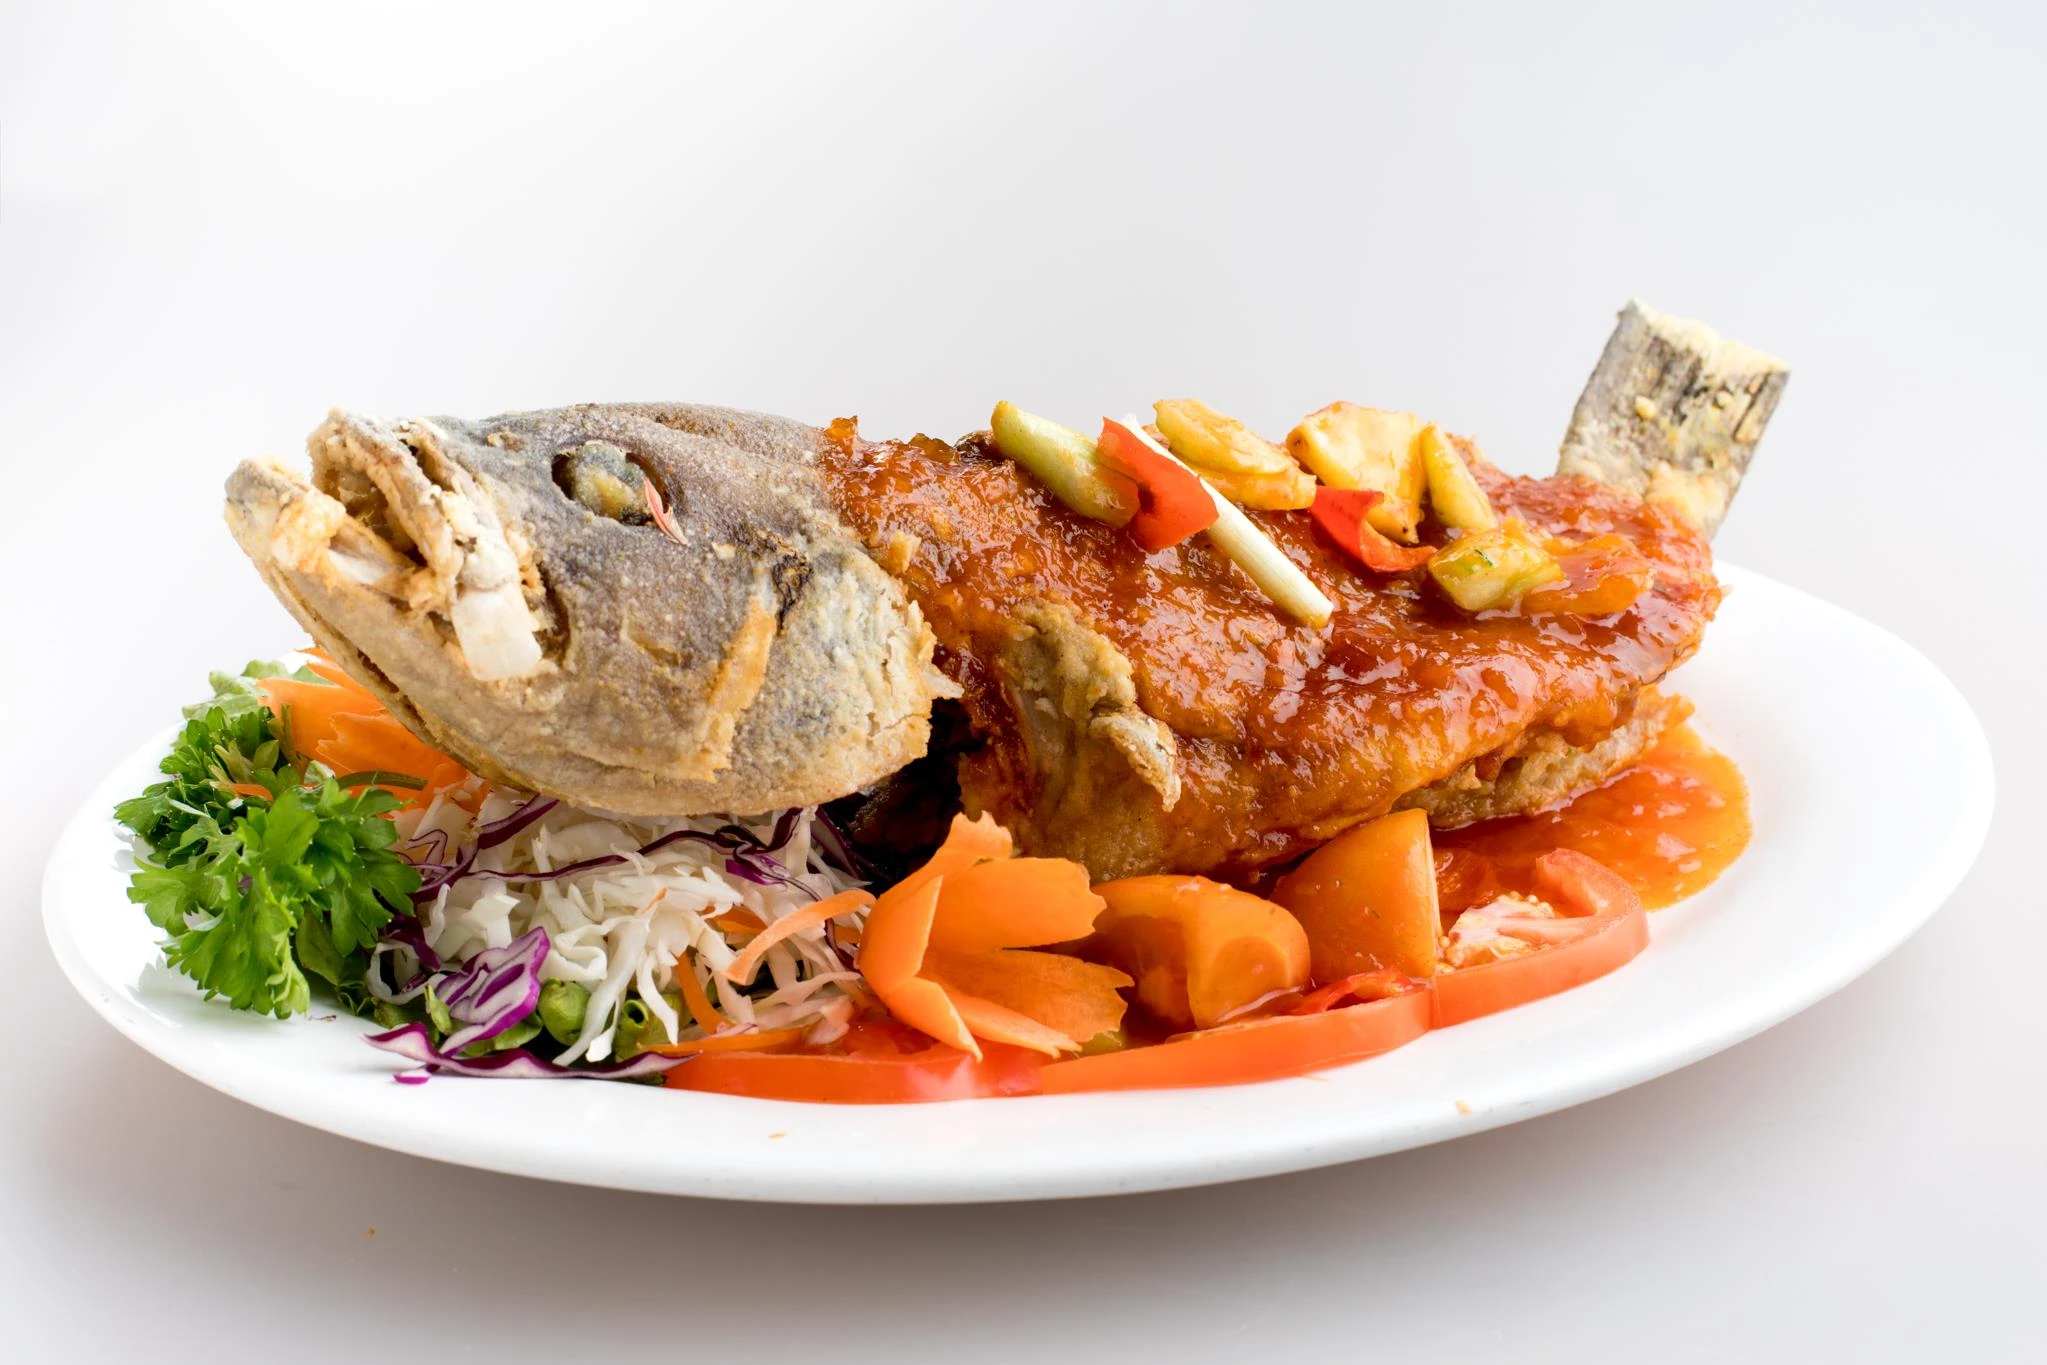 Deep fried grouper with sweet & sour sauce